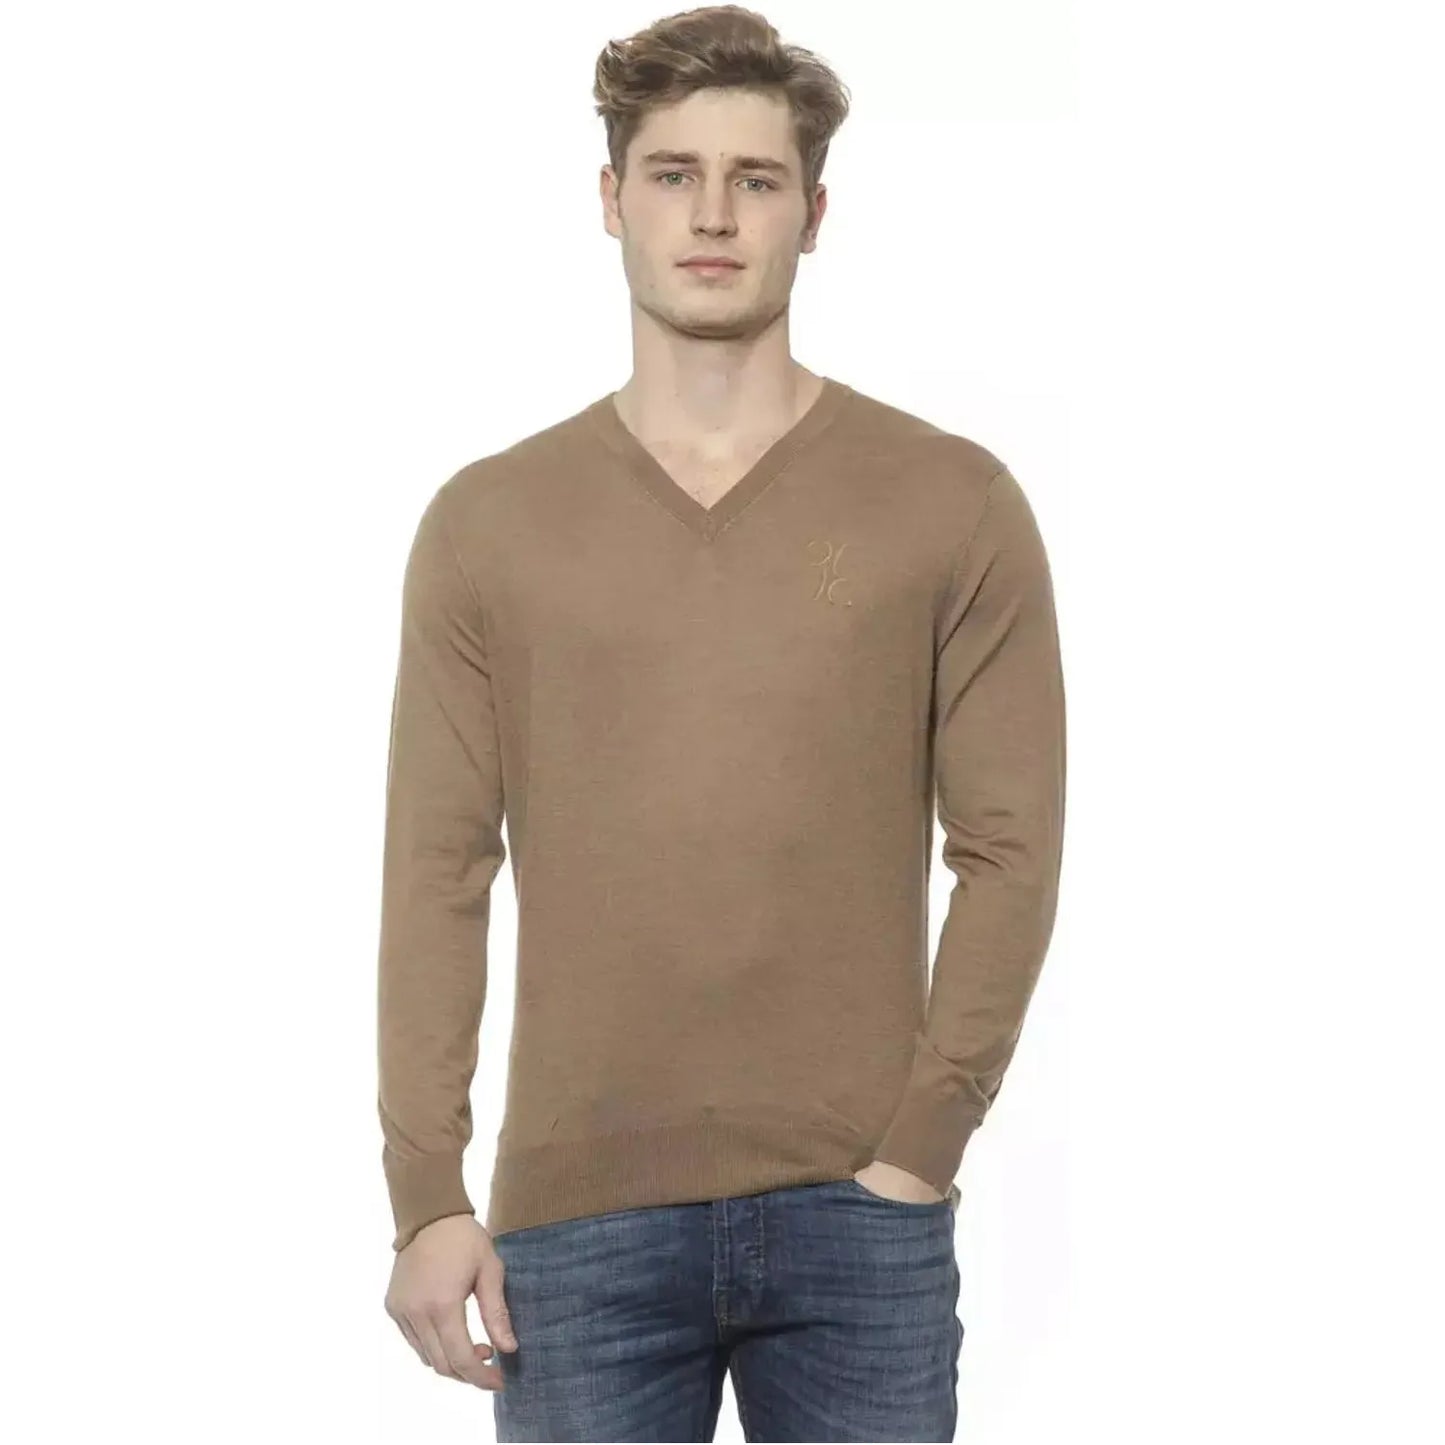 Billionaire Italian Couture Elegant Beige V-Neck Cashmere Sweater for Men tabacco-sweater stock_product_image_19963_1762251511-32-9a420abc-dc7.webp